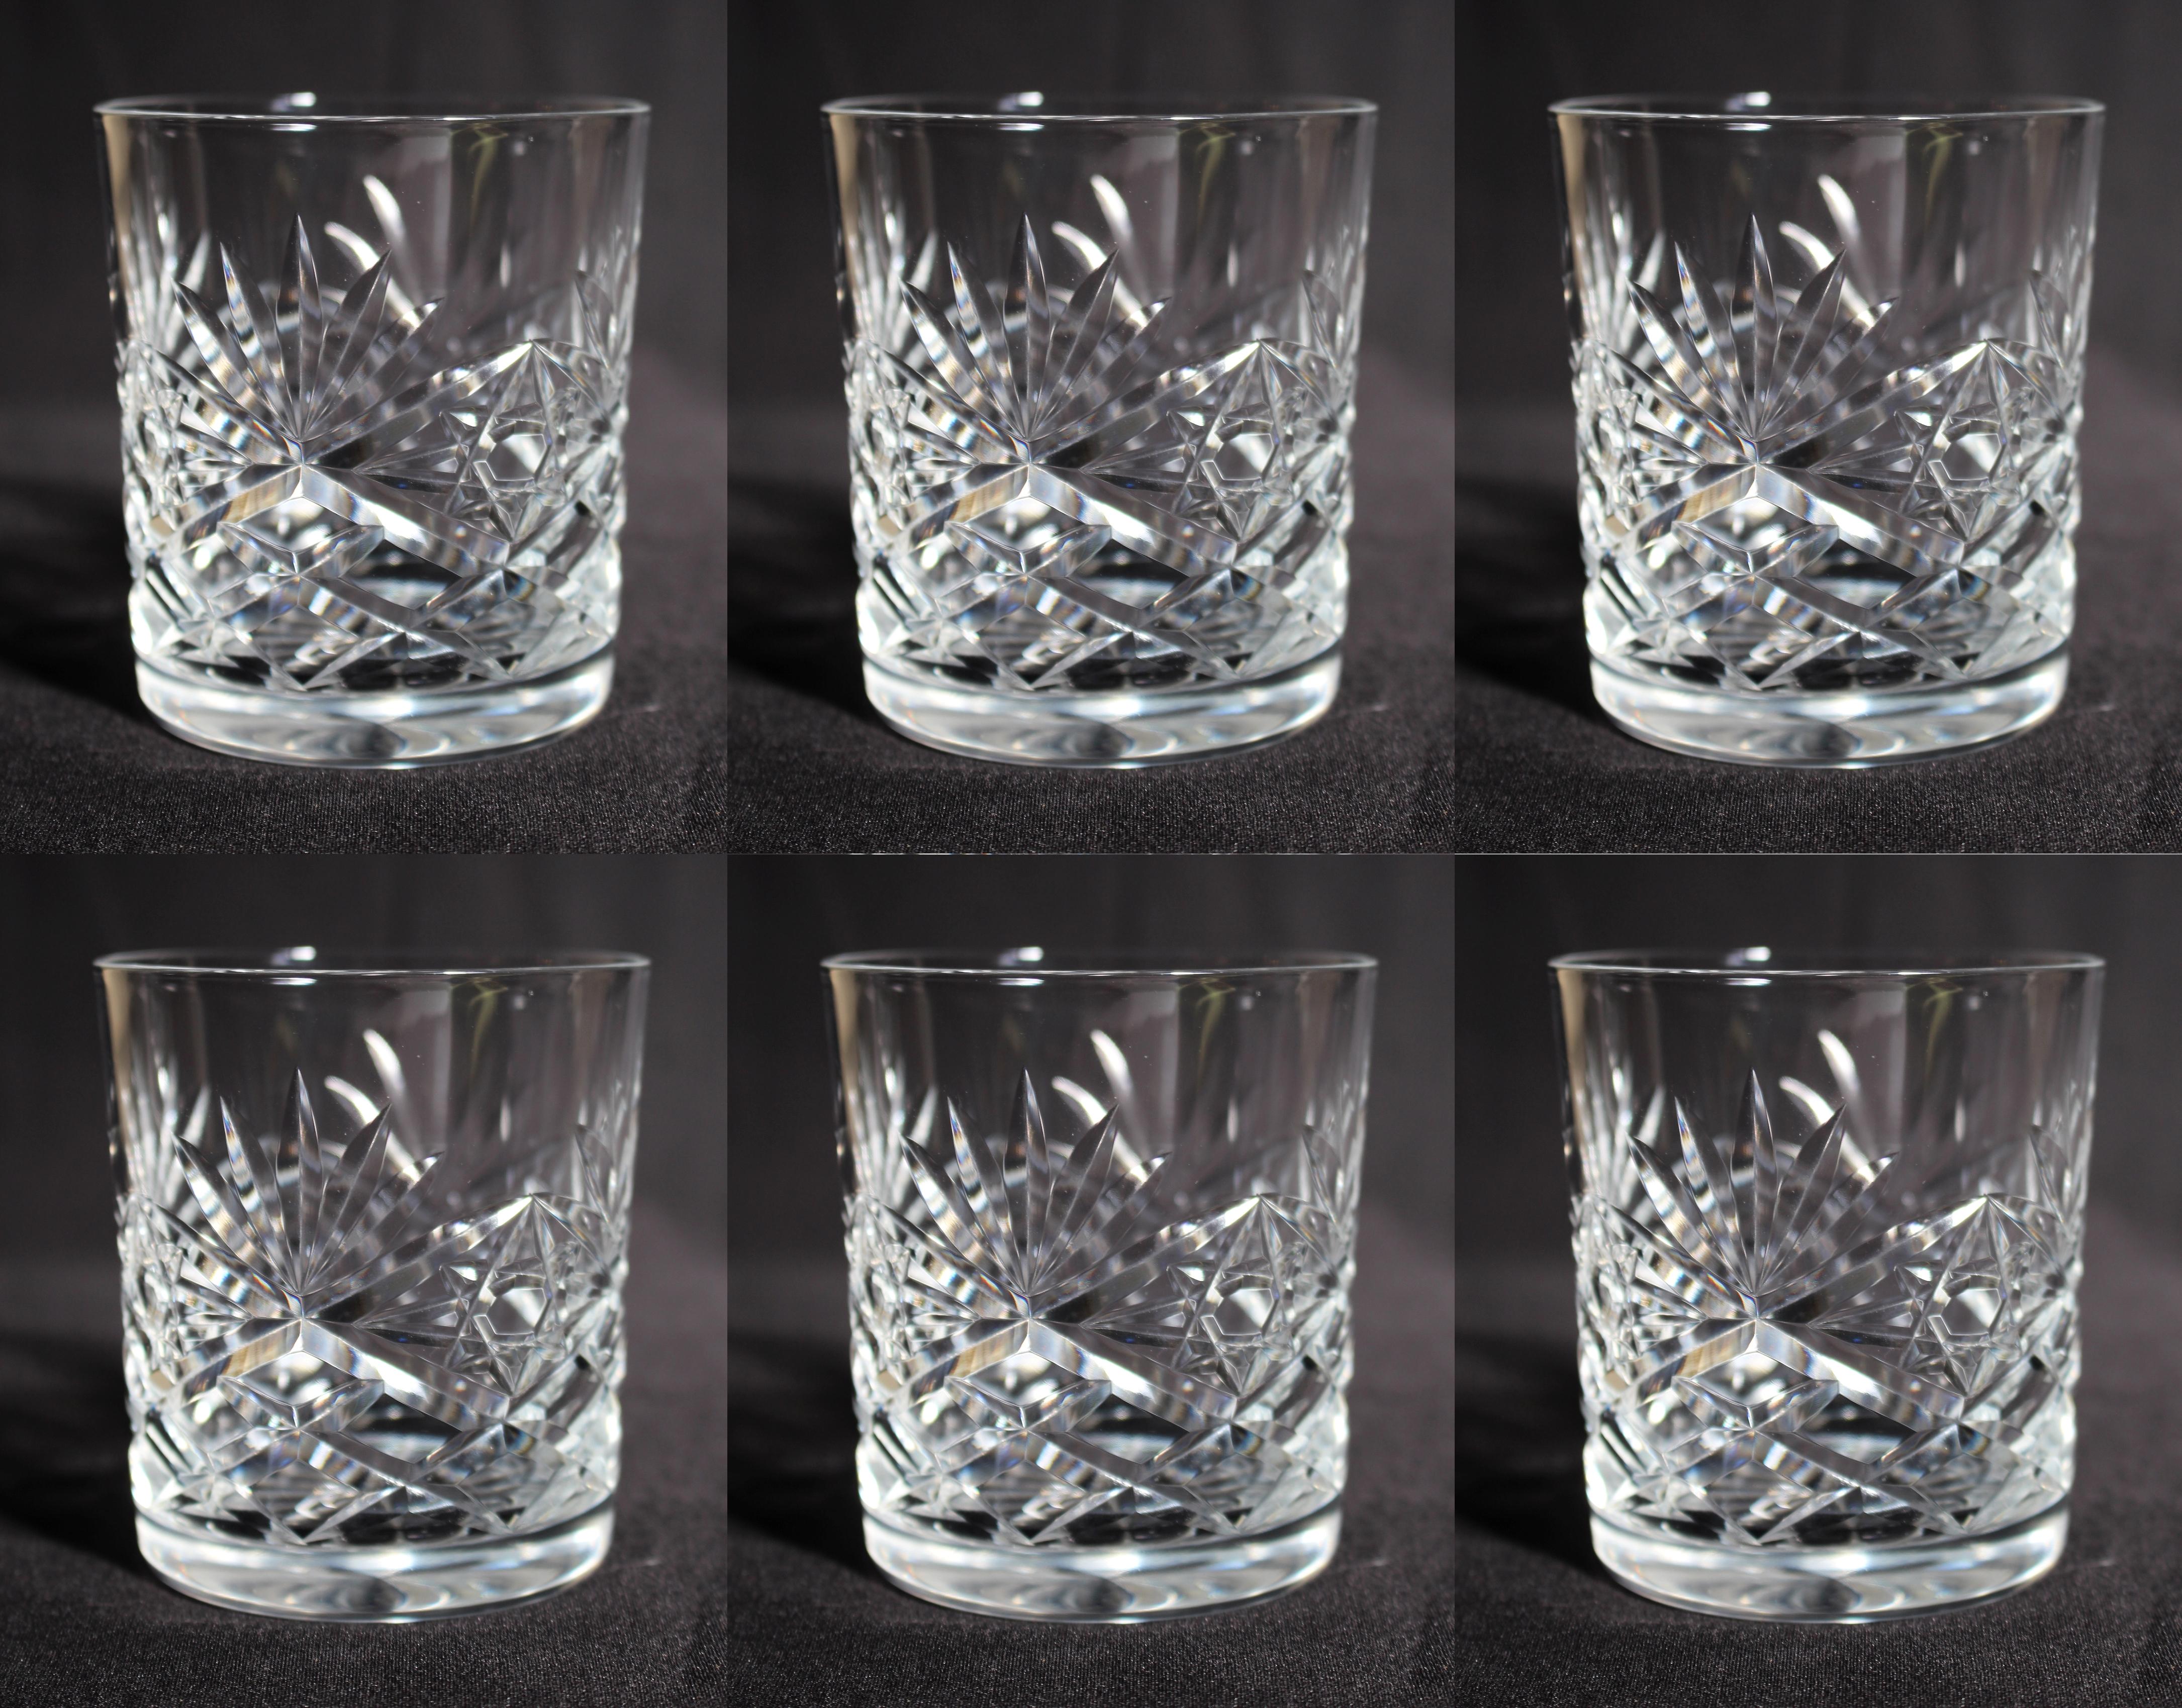 Set of 6 cut Glass Stourbridge crystal spirit glasses


Manufactured in the famous Stourbridge glassworks in England, c.1980

Set of 6 spirit tumblers

Measures: Top diameter: 7.5 cm / 3 in

Height: 9 cm / 3 1/2 in
 

This glass is